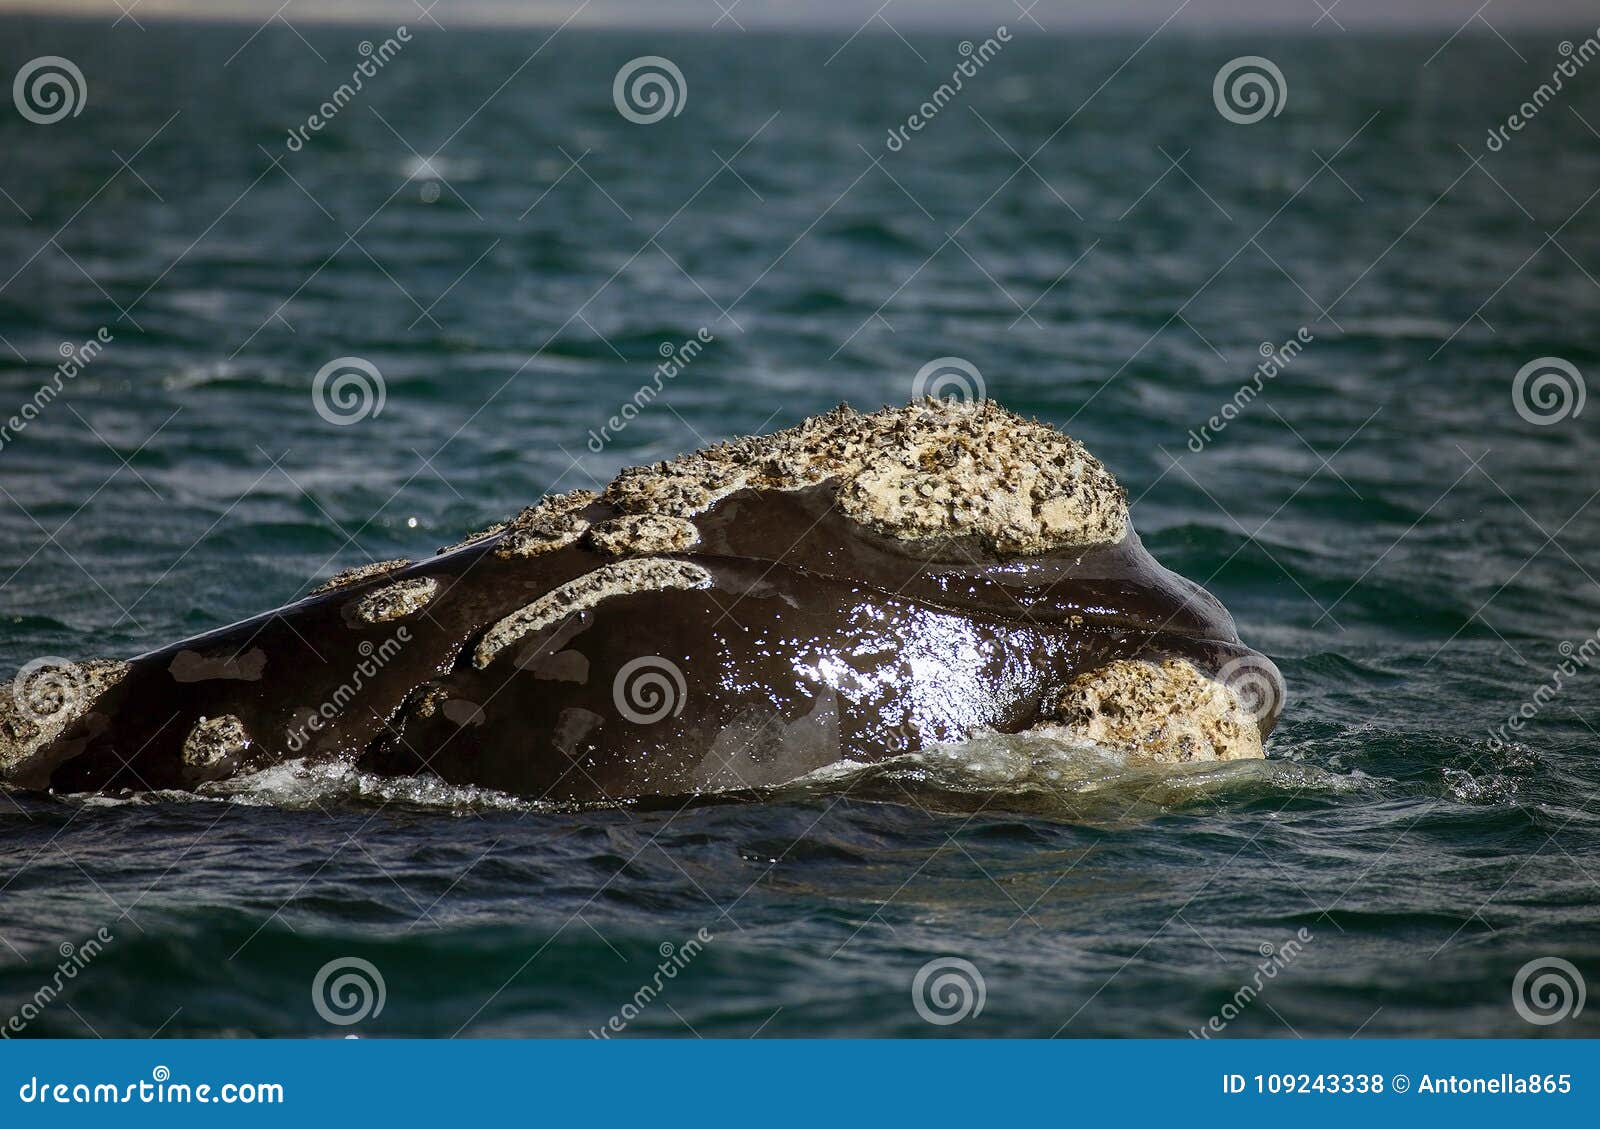 southern right whale at puerto piramides in valdes peninsula, atlantic ocean, argentina